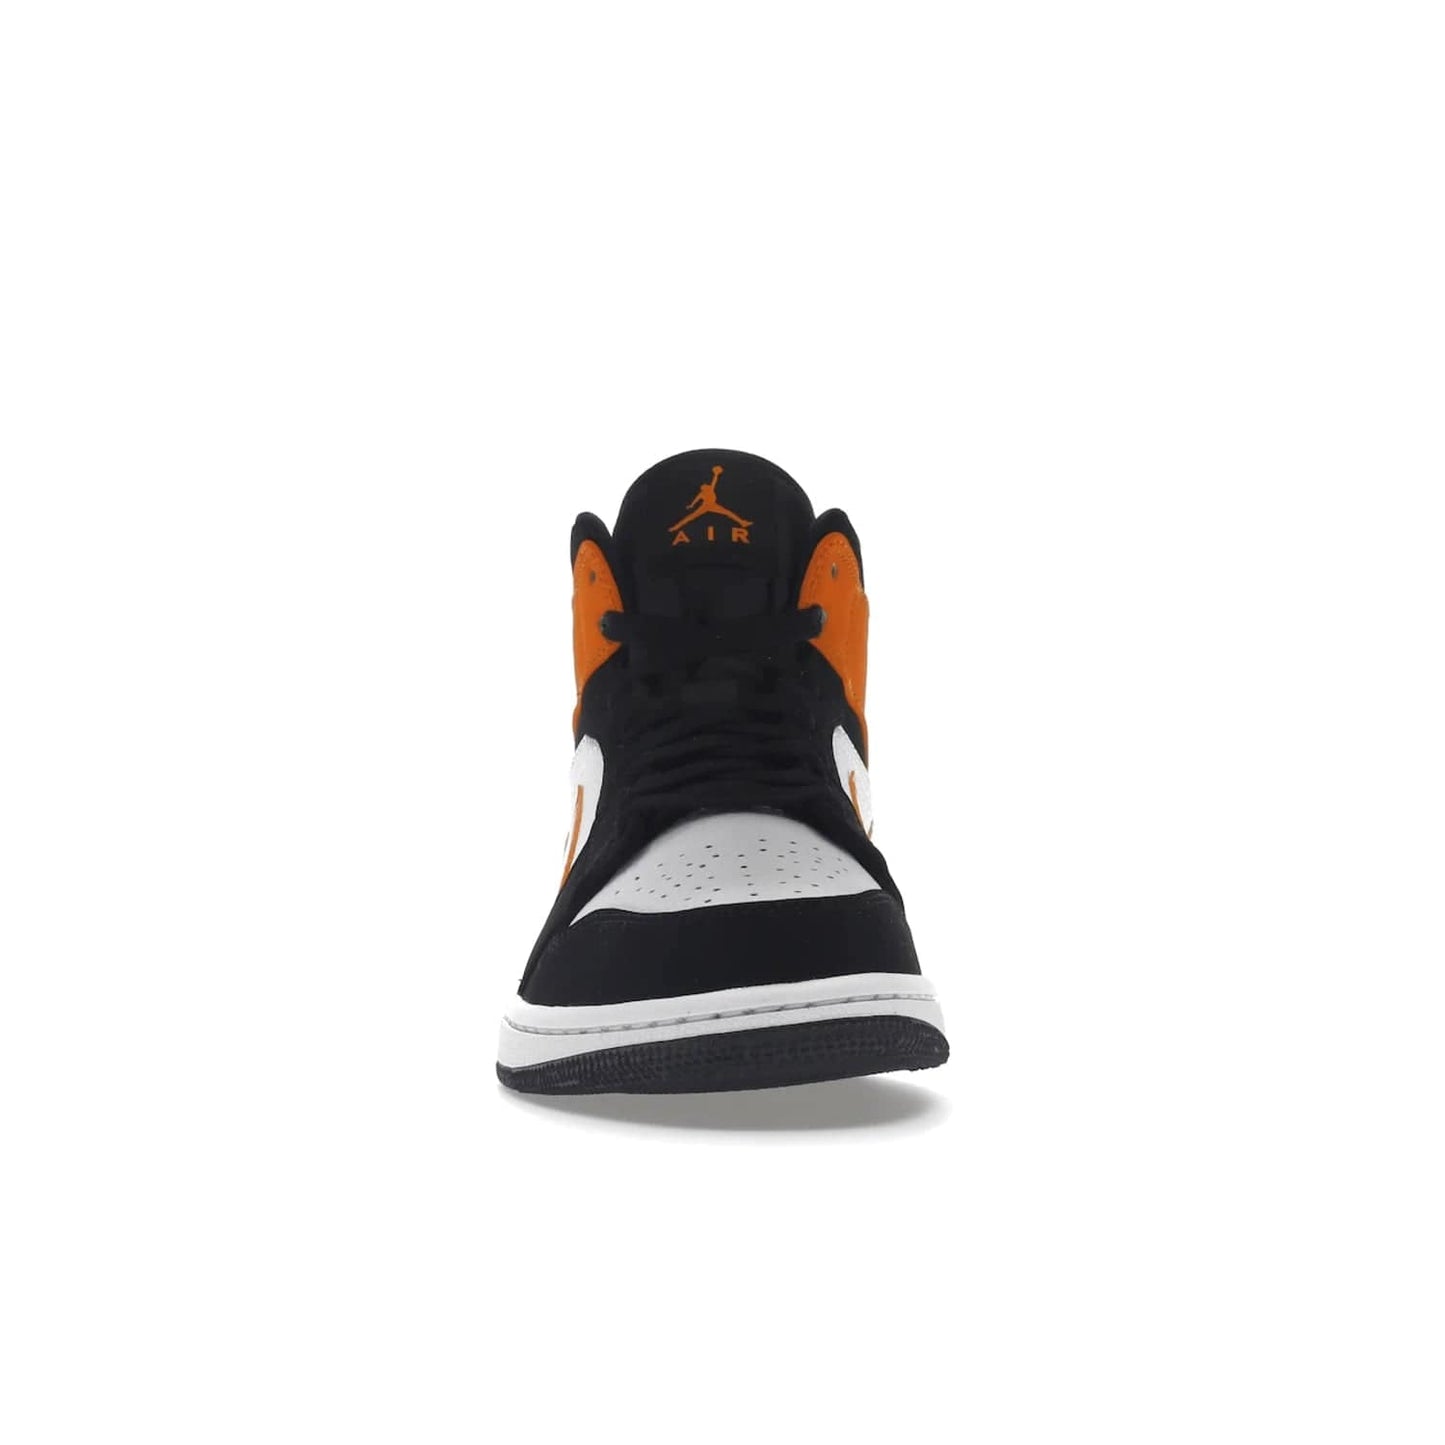 Jordan 1 Mid Shattered Backboard - Image 10 - Only at www.BallersClubKickz.com - The Air Jordan 1 Mid Shattered Backboard offers a timeless Black/White-Starfish colorway. Classic Swoosh logo and AJ insignia plus a shatterd backboard graphic on the insole. Get your pair today!